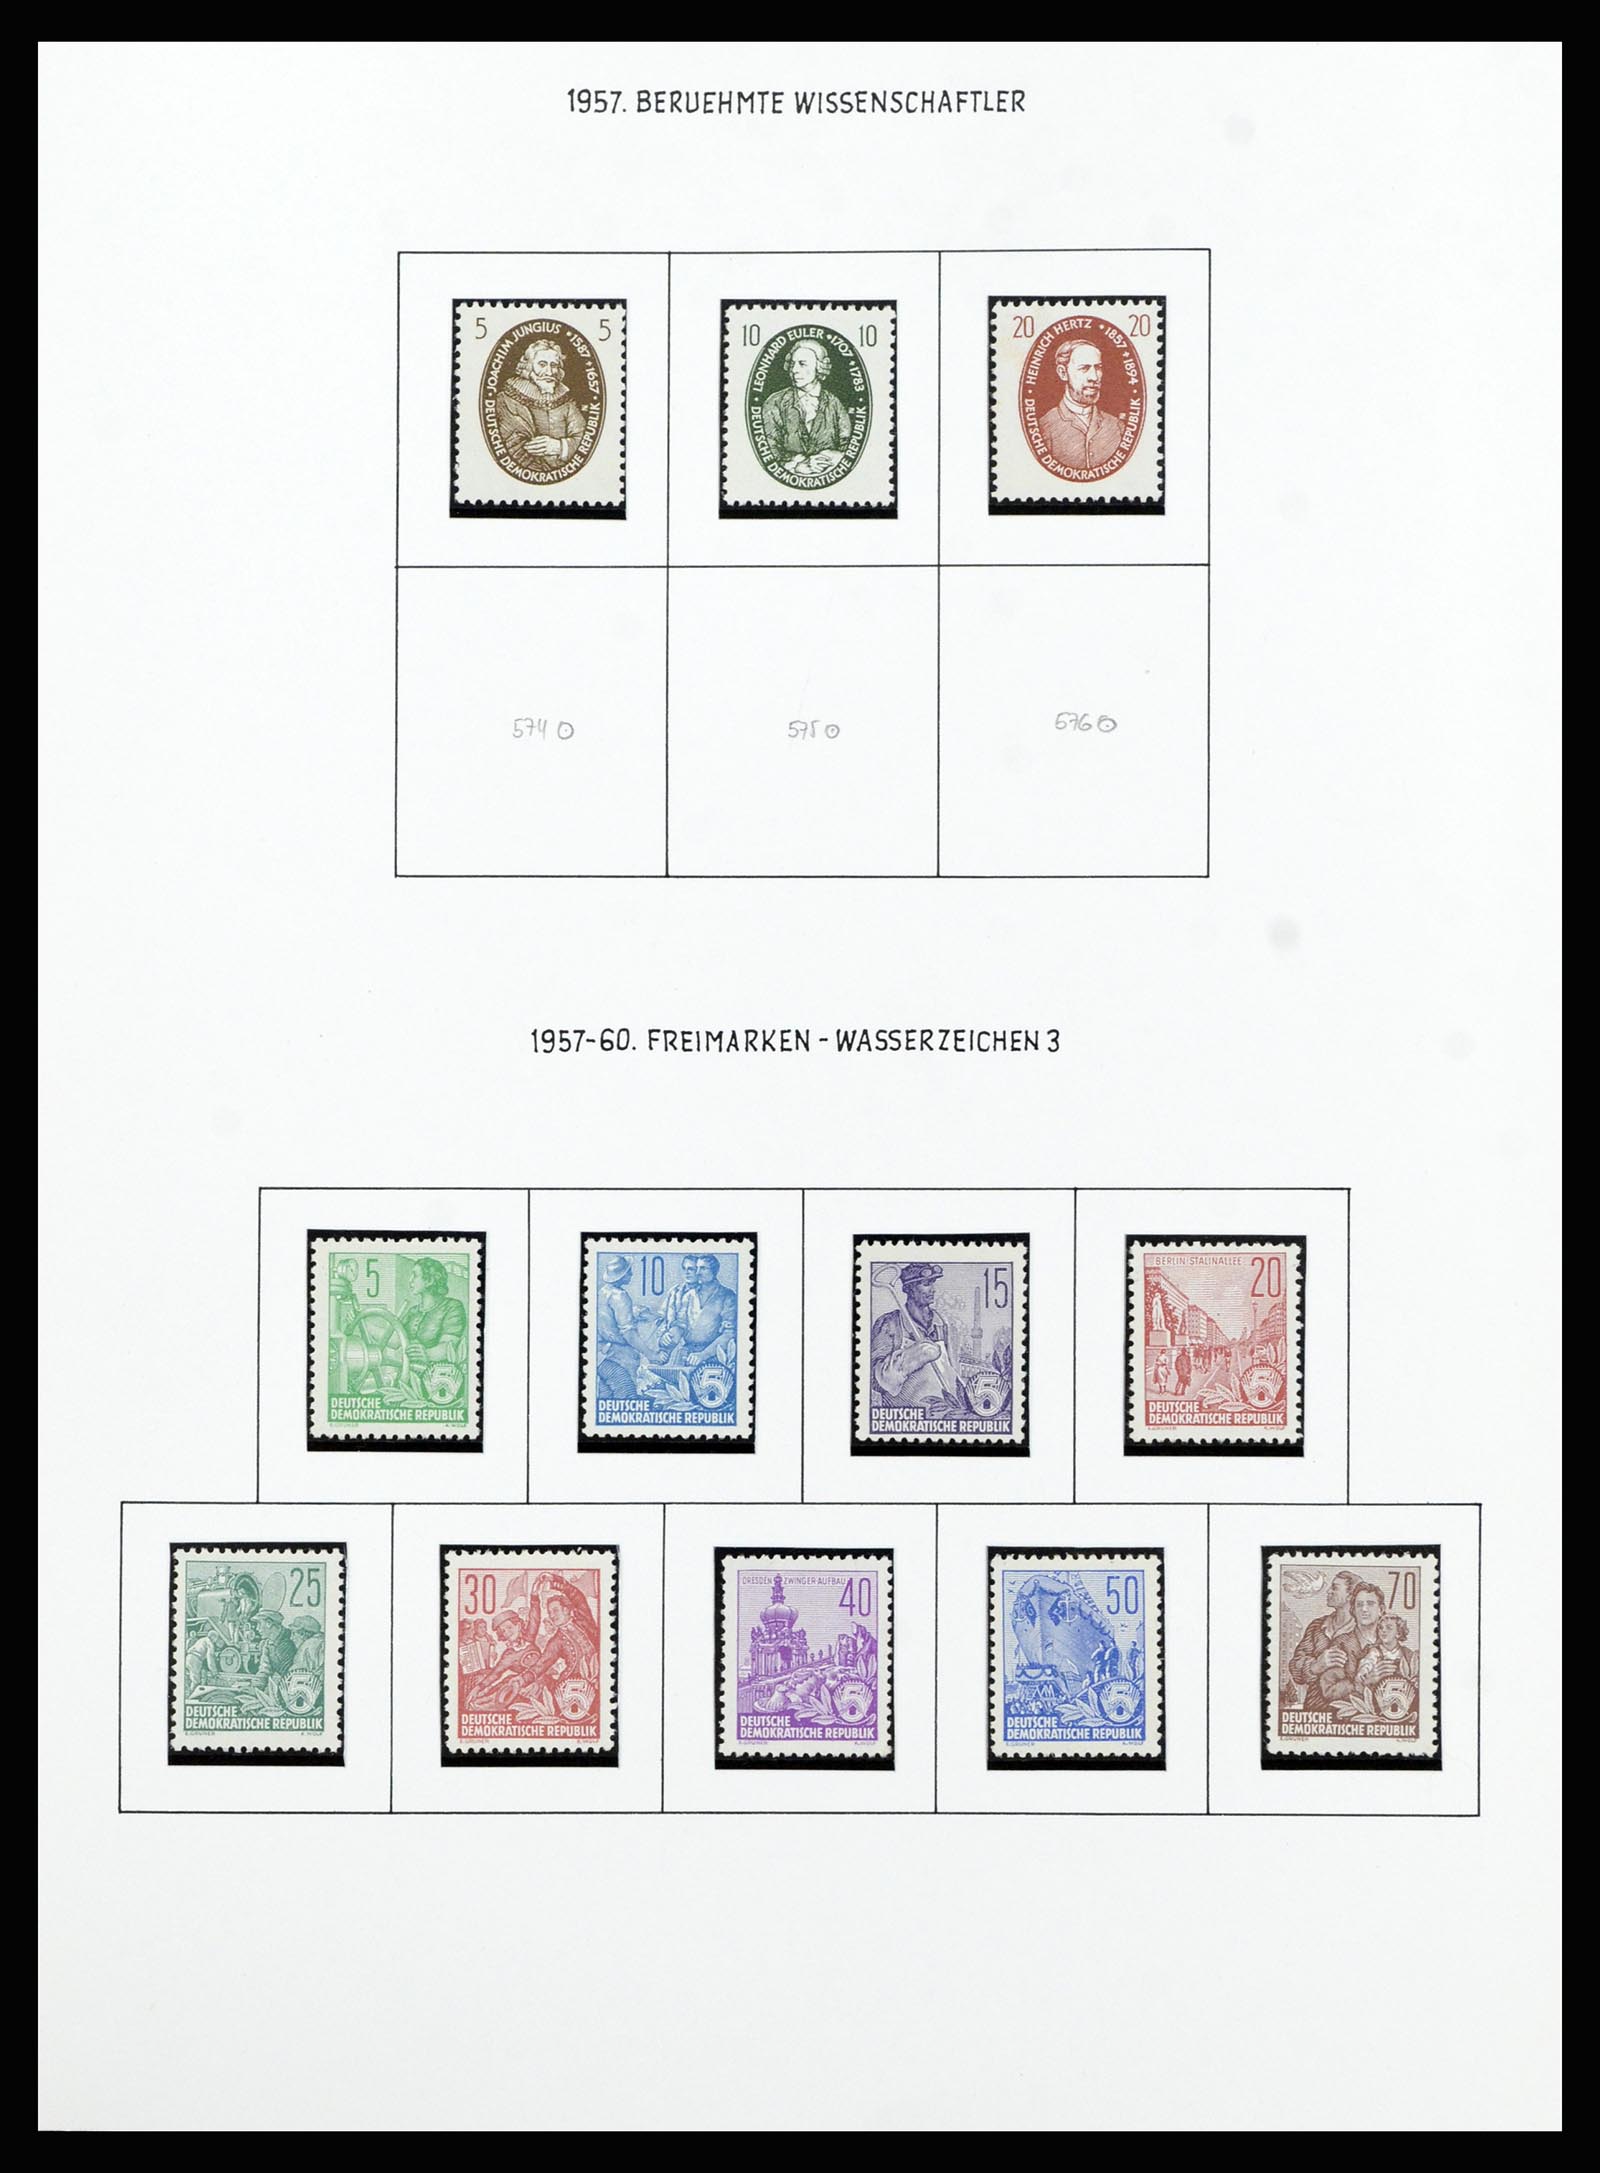 37101 045 - Stamp collection 37101 GDR 1954-1960.